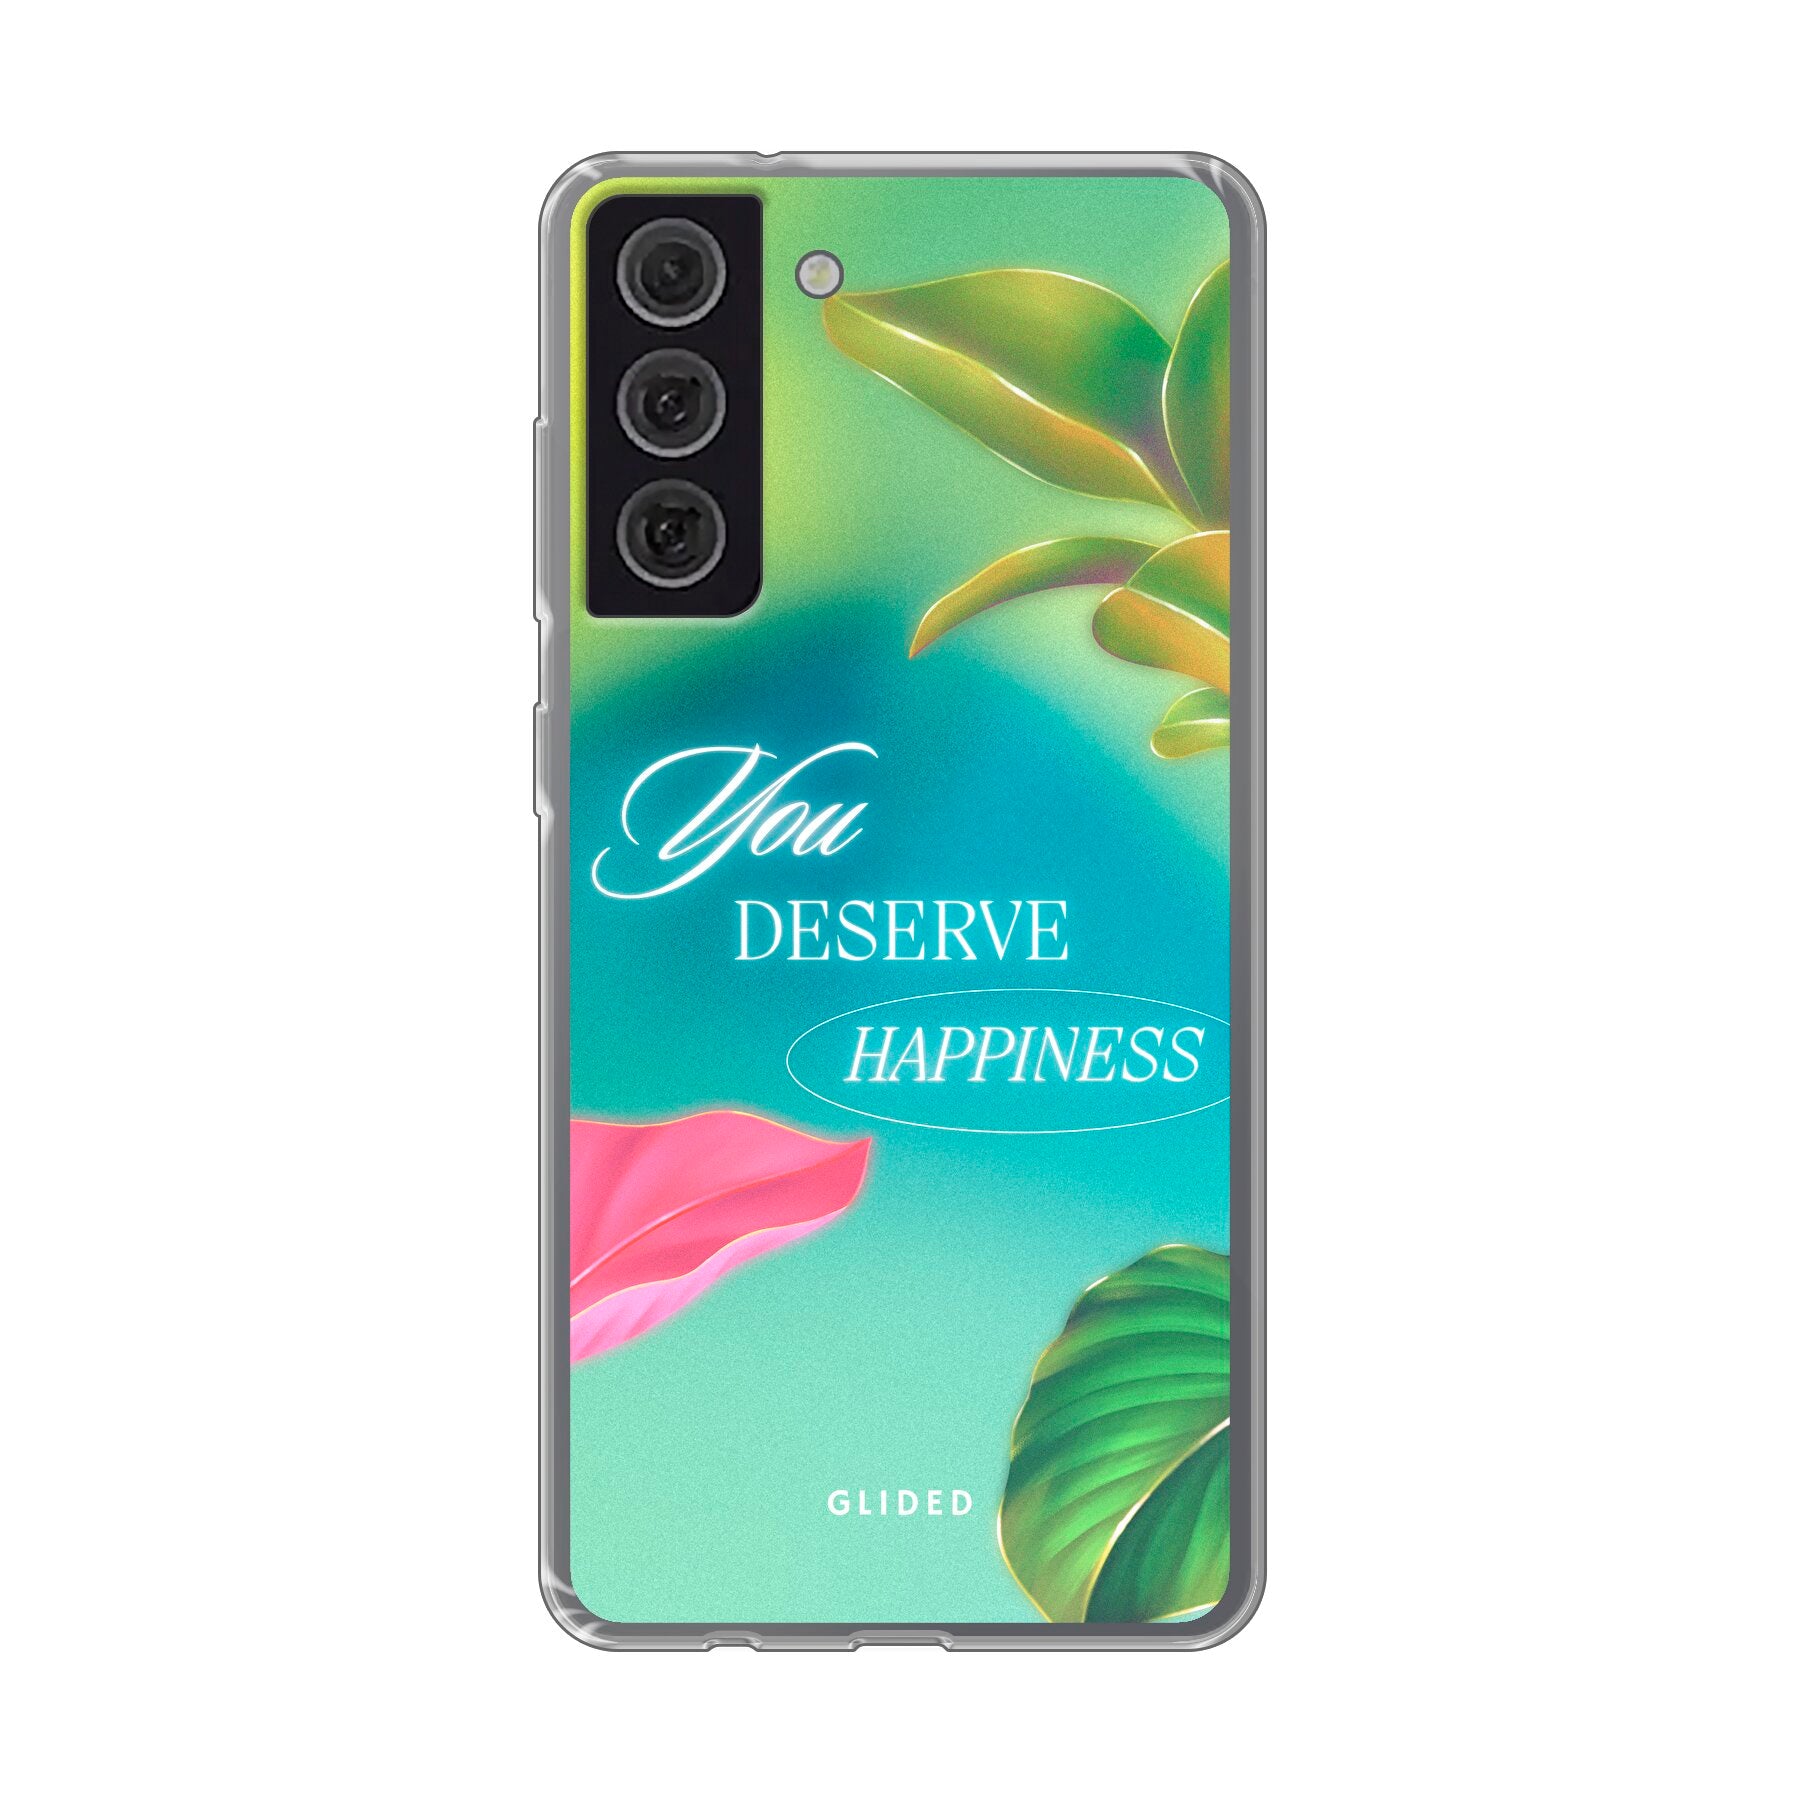 Happiness - Samsung Galaxy S21 FE - Soft case